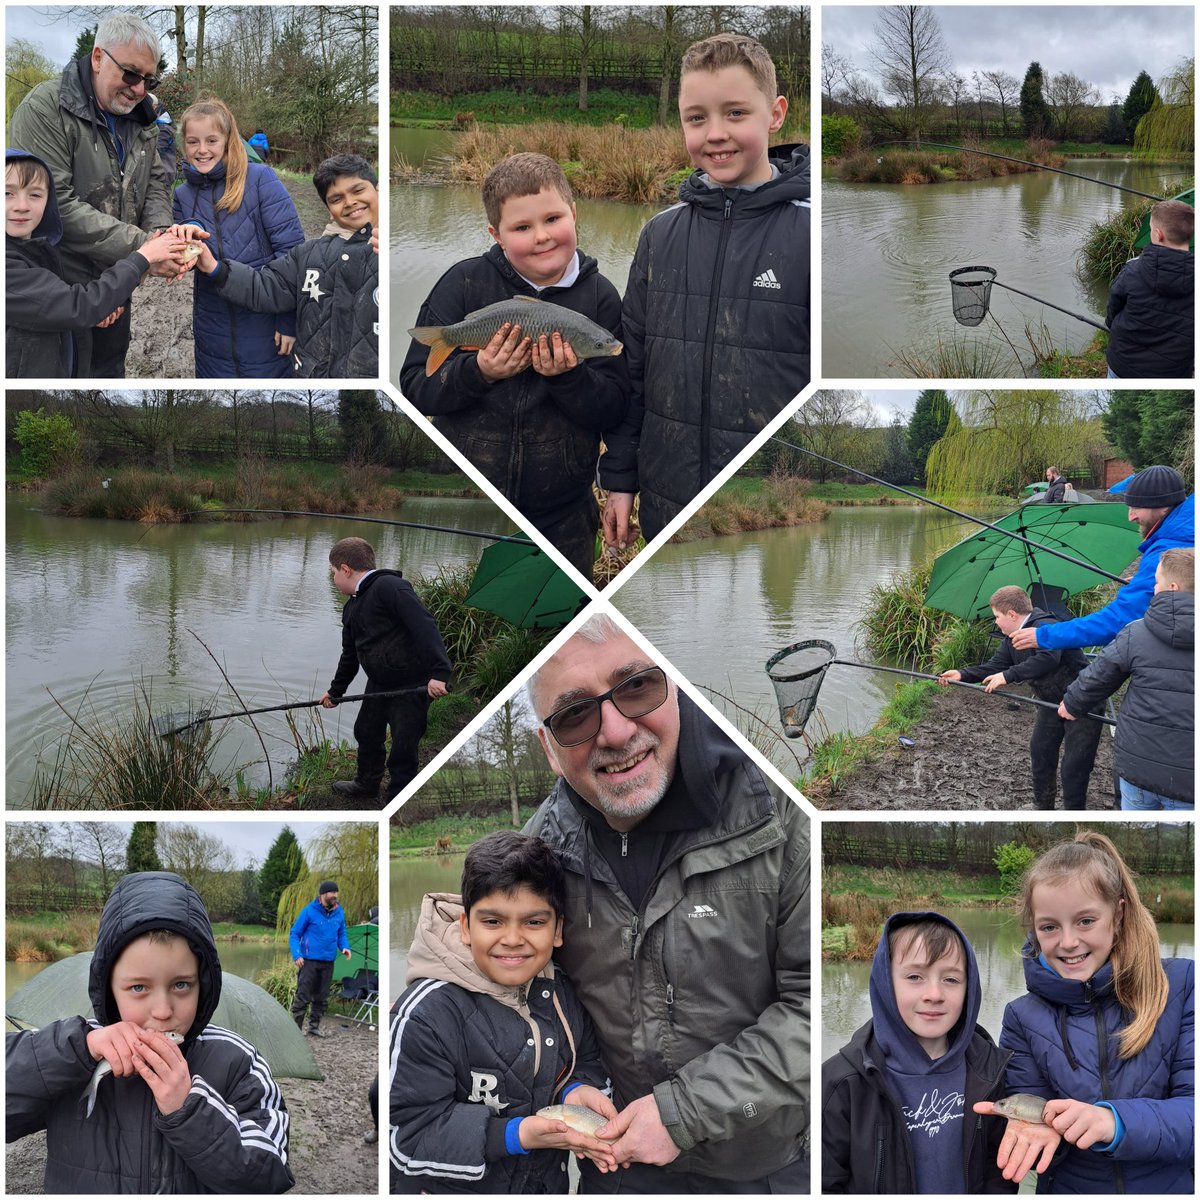 #FeelGoodFriday🎣...absolutely fantastic! What a superb morning out in the fresh air, working together, learning from each other, having fun. Just look at the smiles; brilliant. 😊🎣 @BarrowfordSch @hyndburnacademy @PadihamPrimary @SacredHeartcoln @ParkPrimary_SCH @IghtenhillPS👌